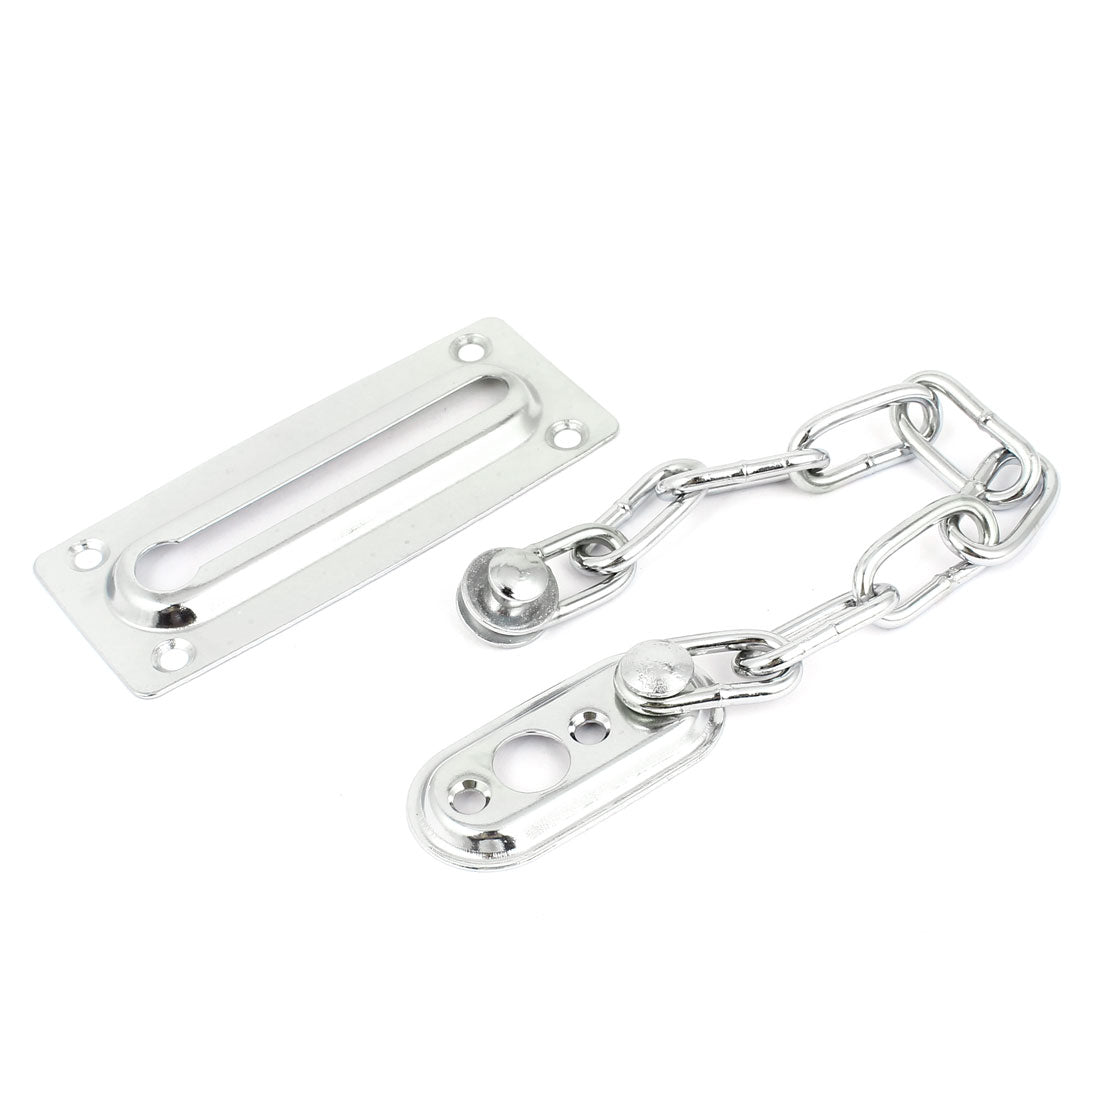 uxcell Uxcell Home Office Hardware Sliding Fastener Door Chain Guard Security Lock Latch Silver Tone